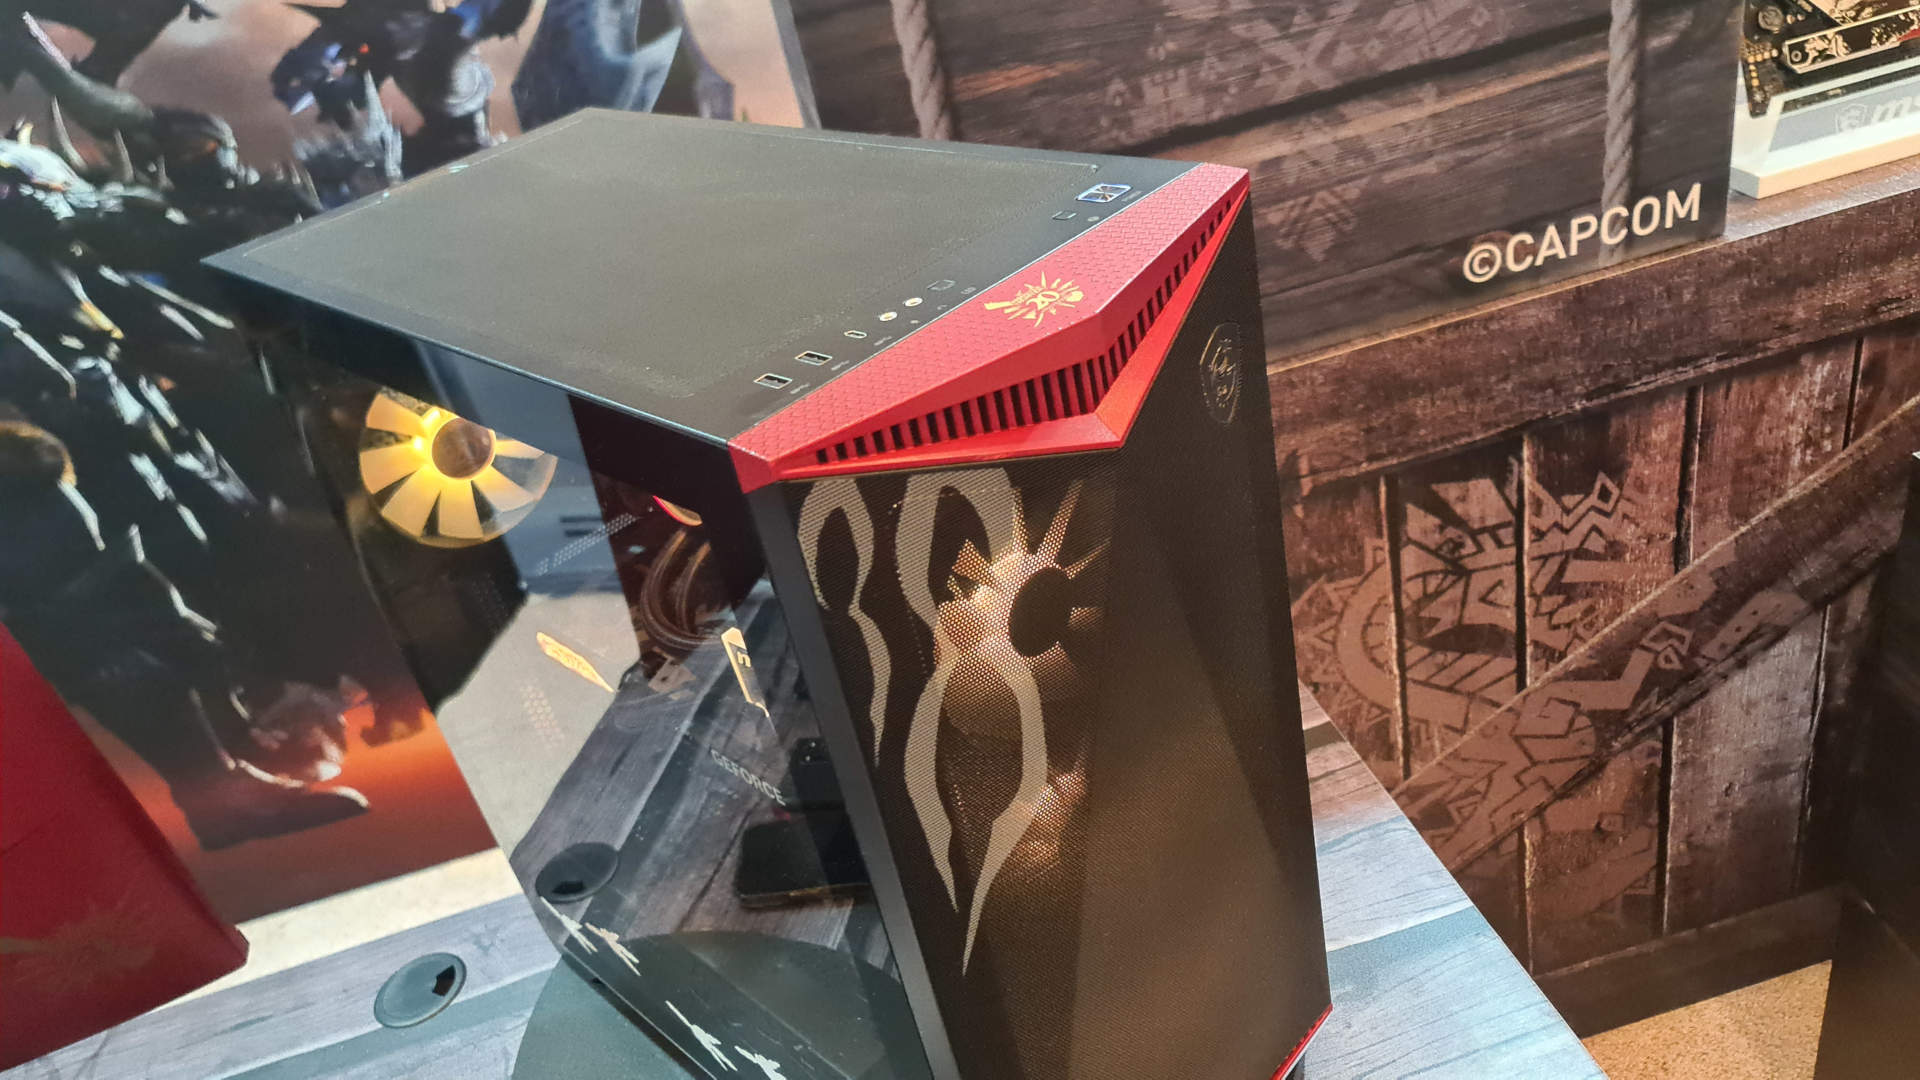 MSI and Capcom colloboration of Monster Hunter themed PC components and products